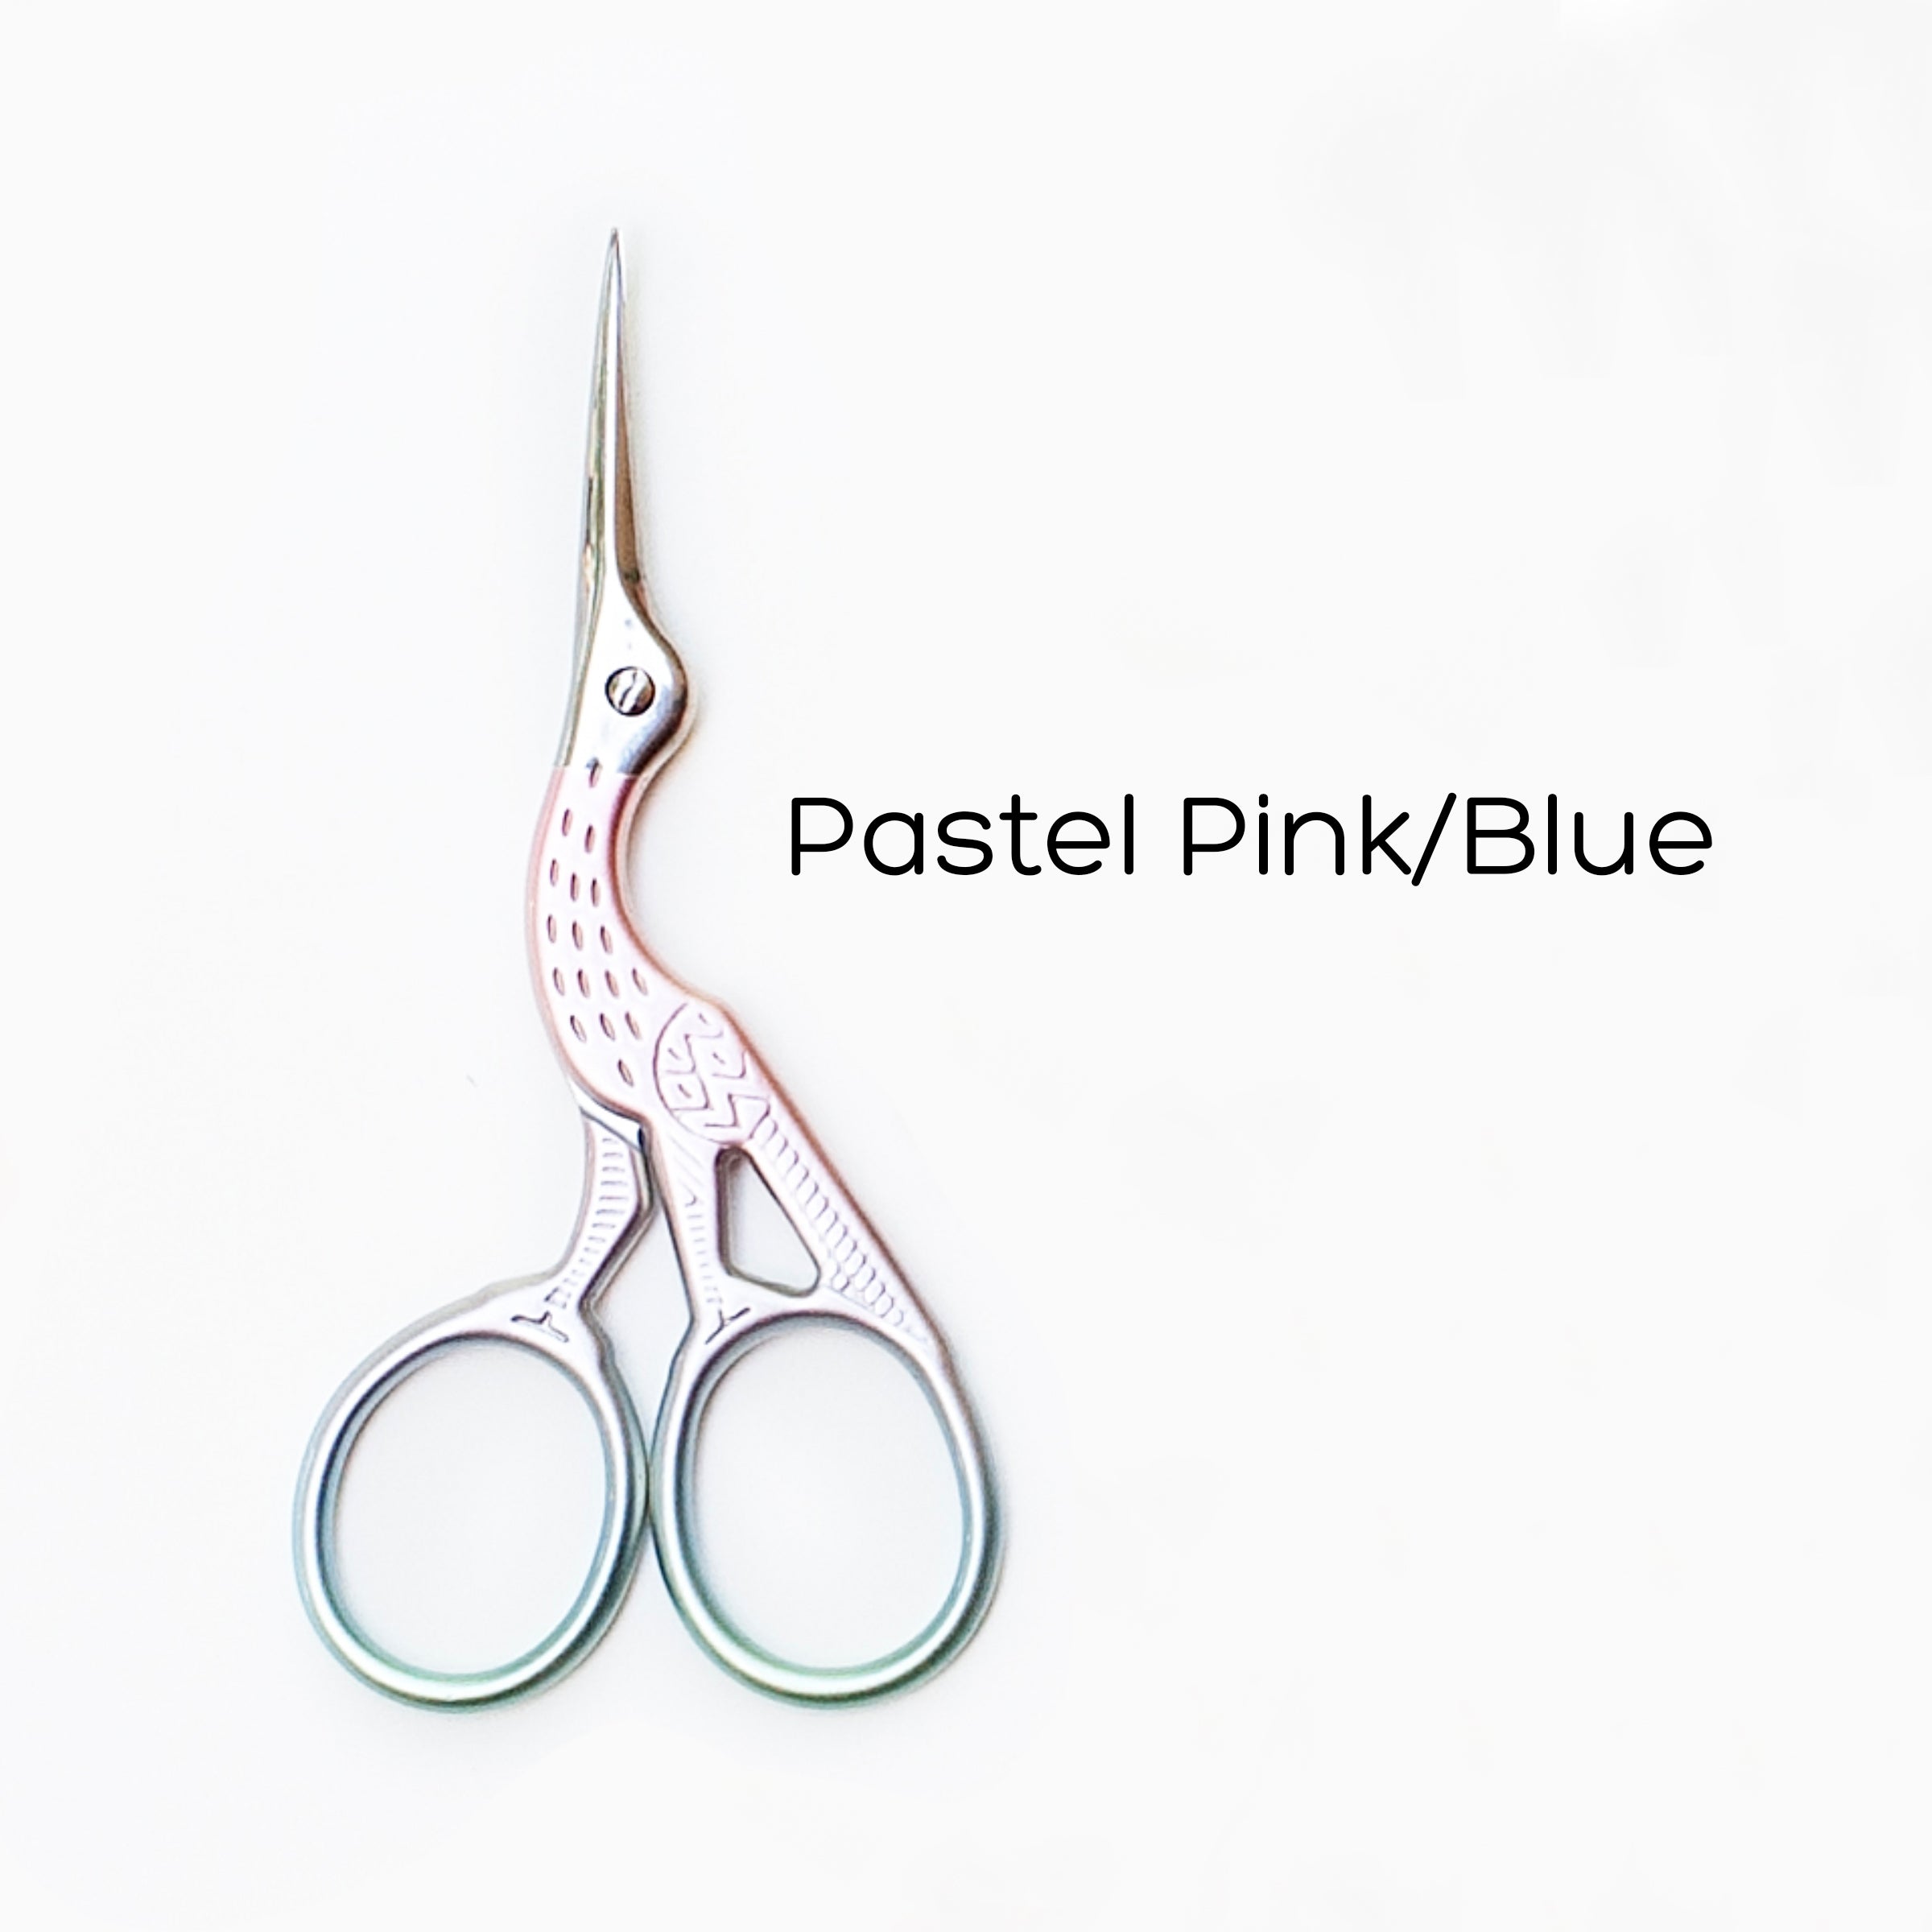 Sublime Stitching Prismatic Stork Embroidery Scissors